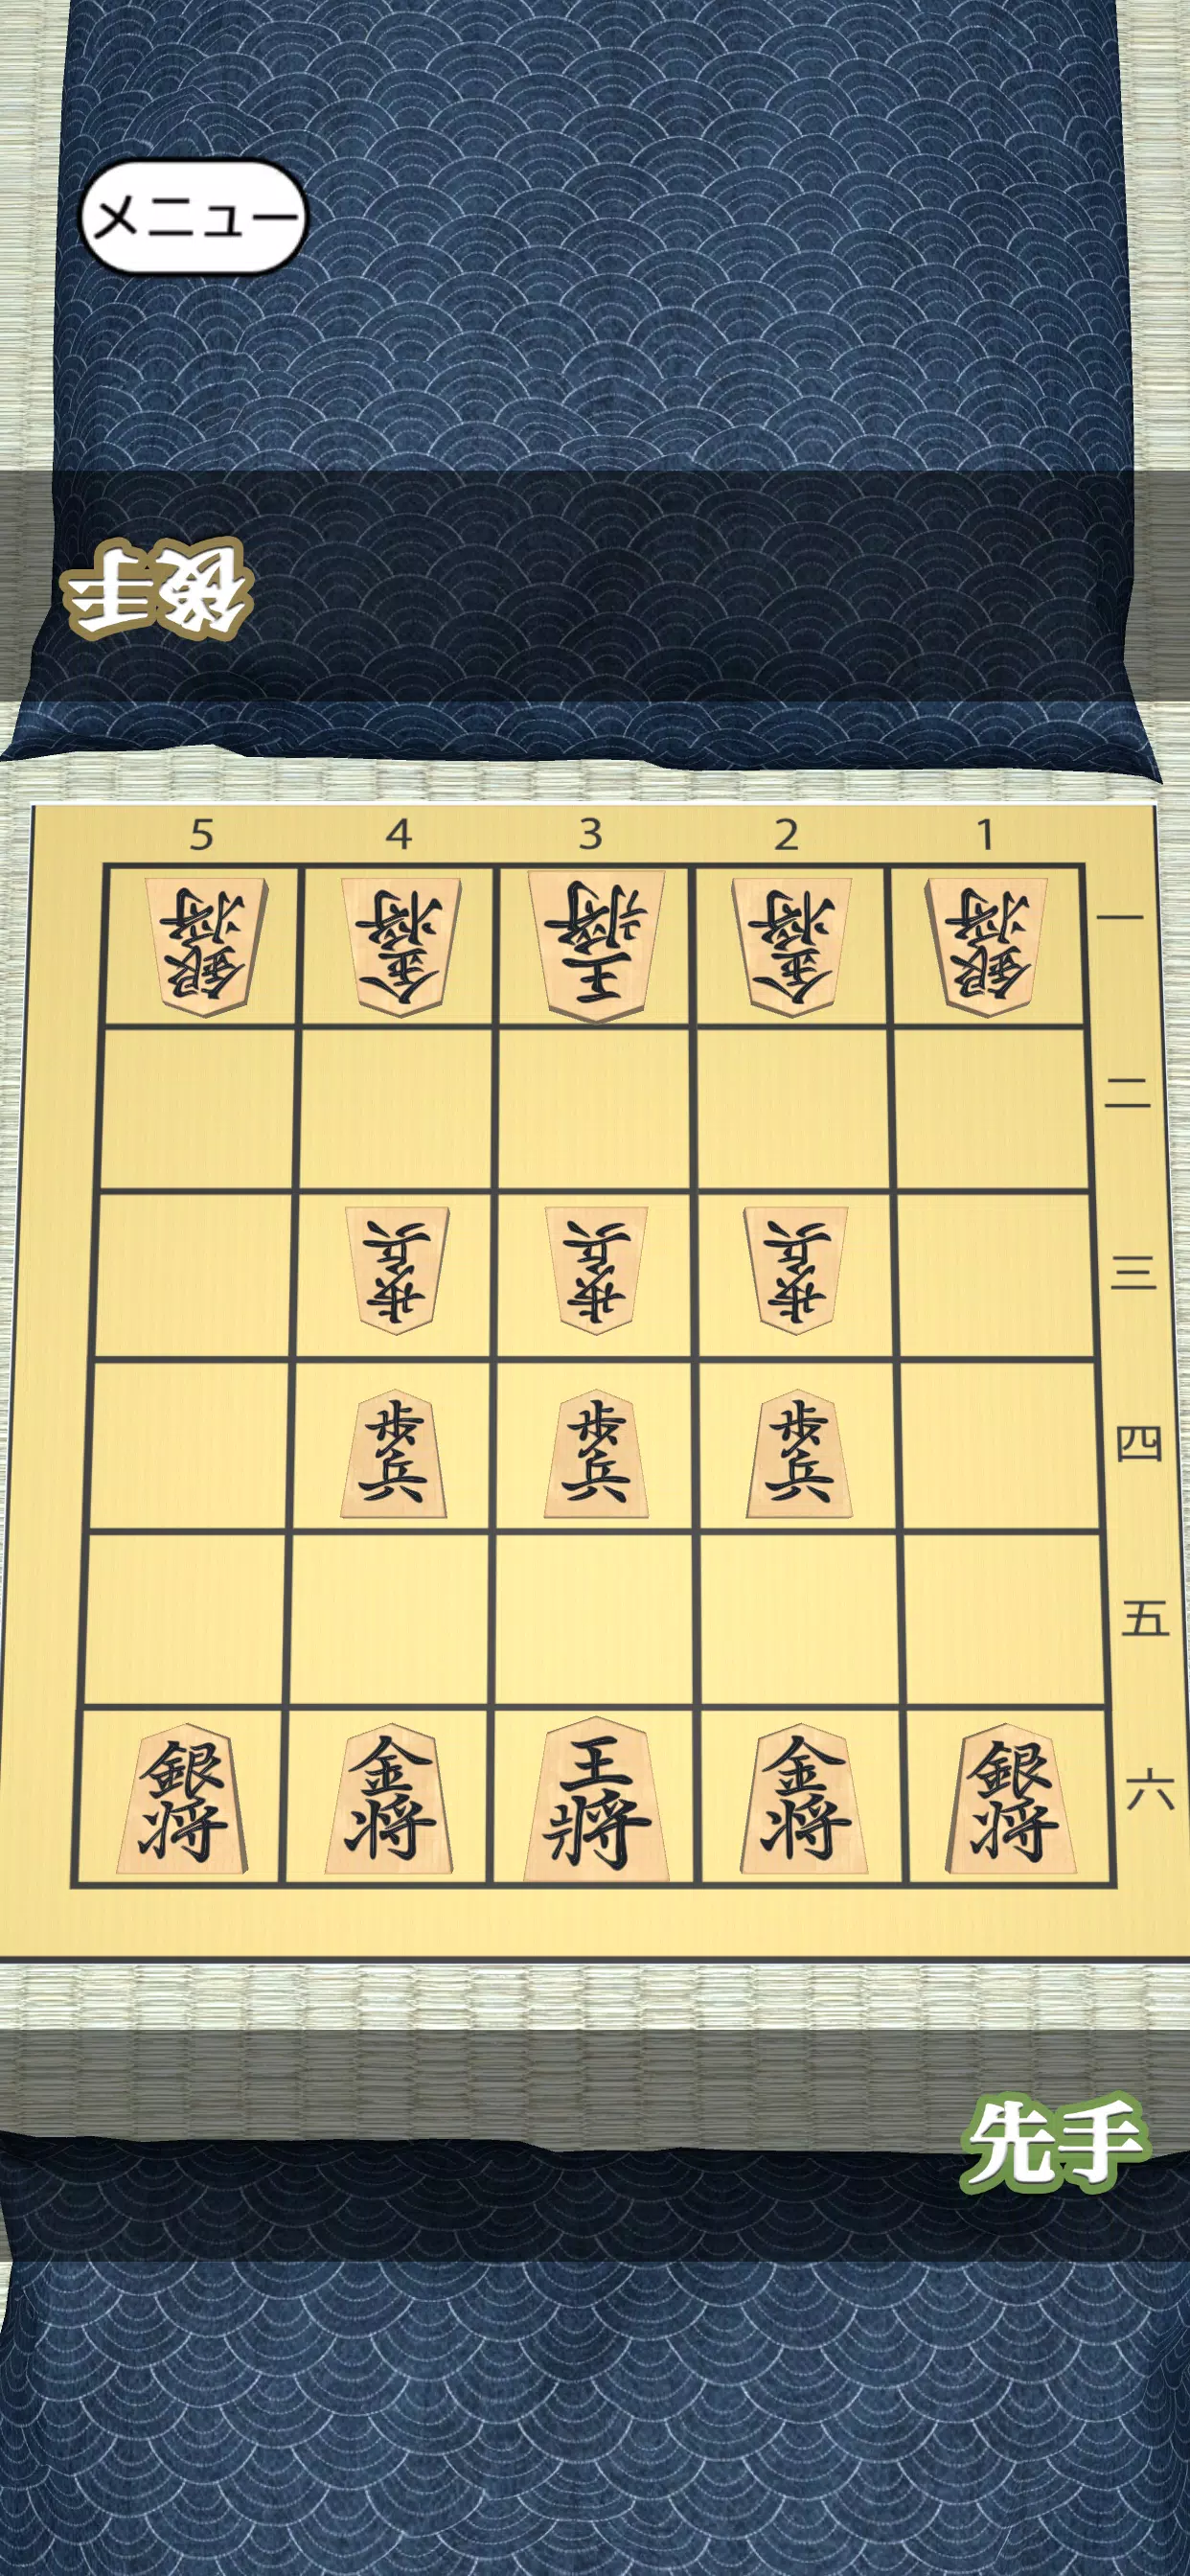 Shogi Mini - Online APK for Android Download